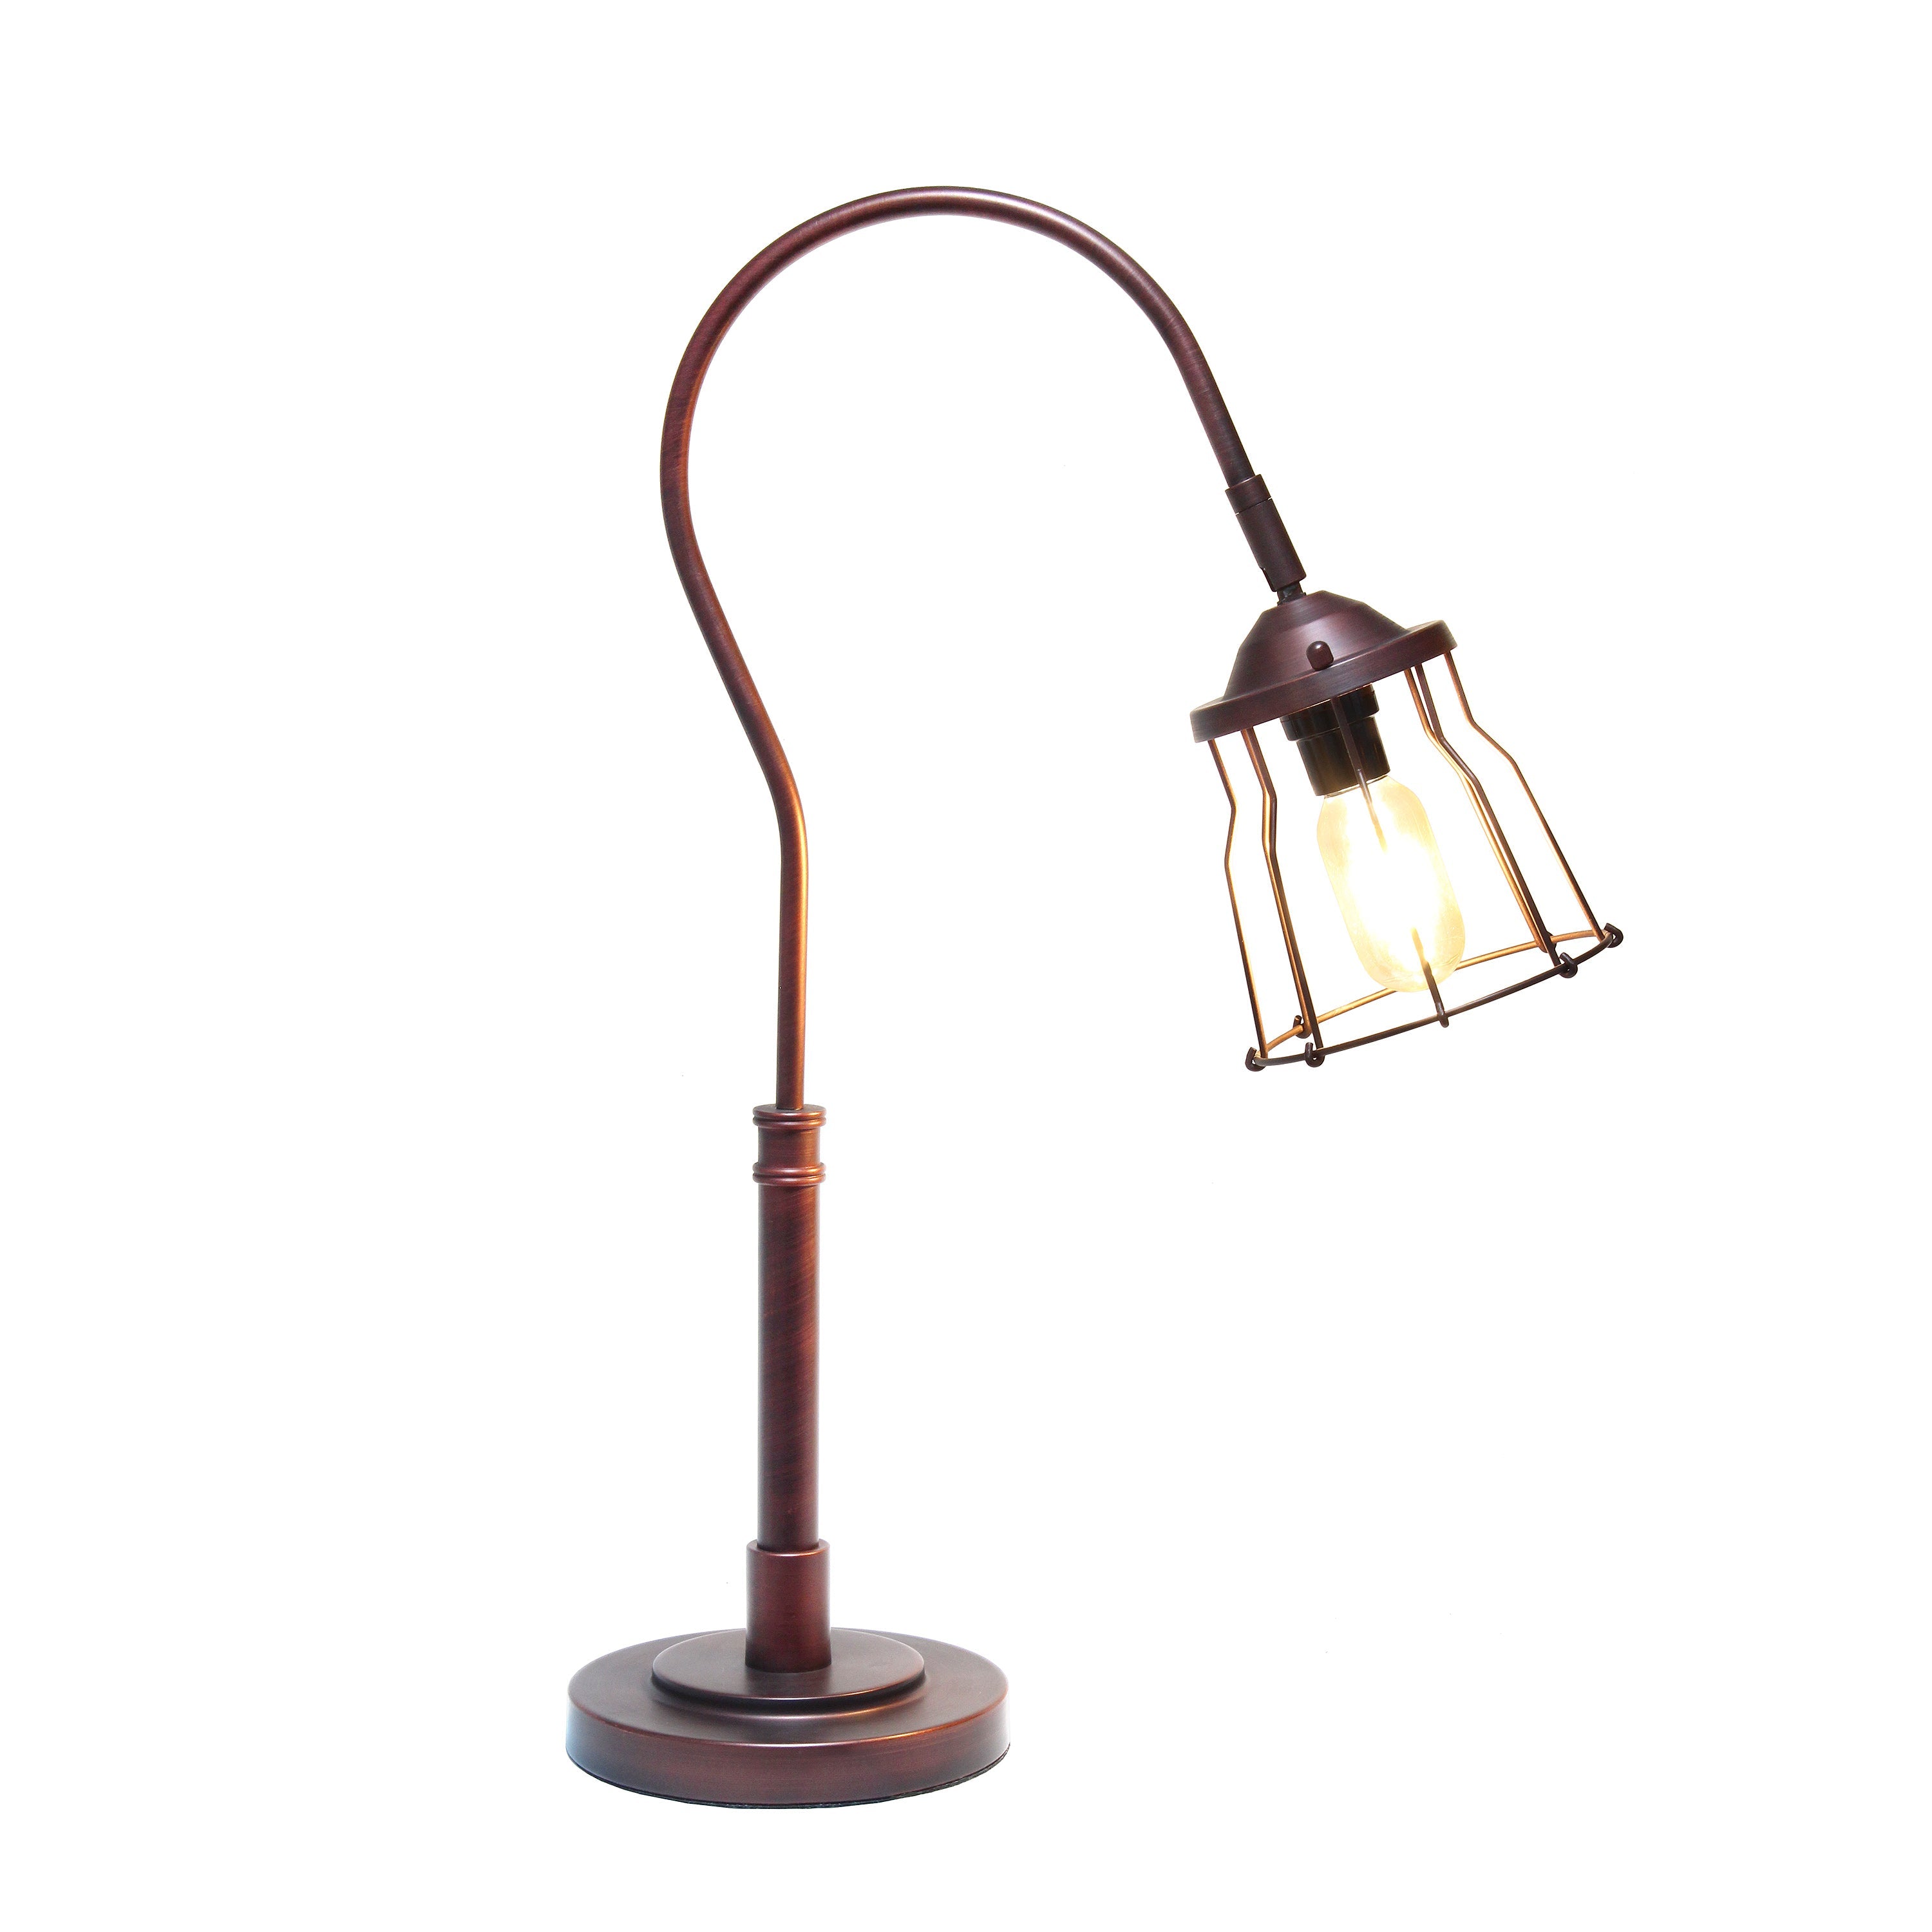 Lalia Home Decorative Rustic Caged Shade Table Lamp, Red Bronze